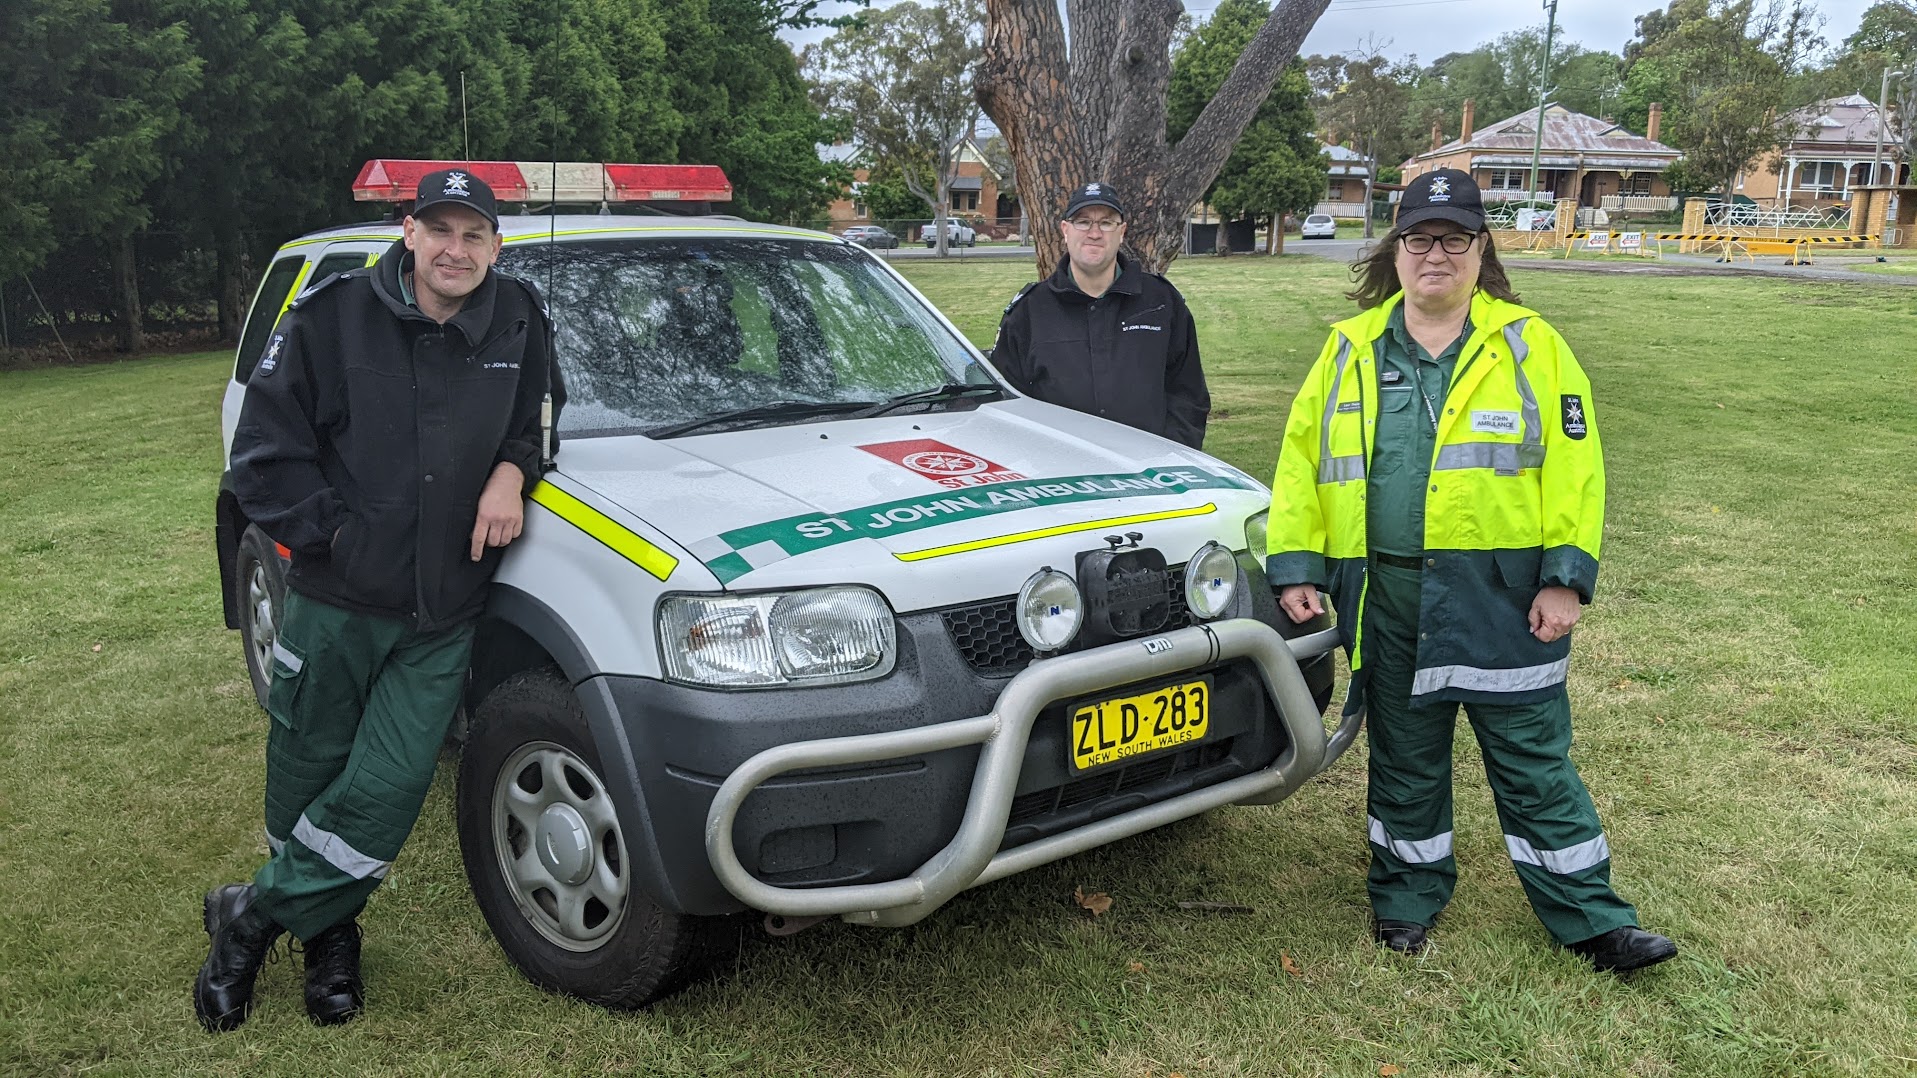 St John Ambulance volunteers driven to help others